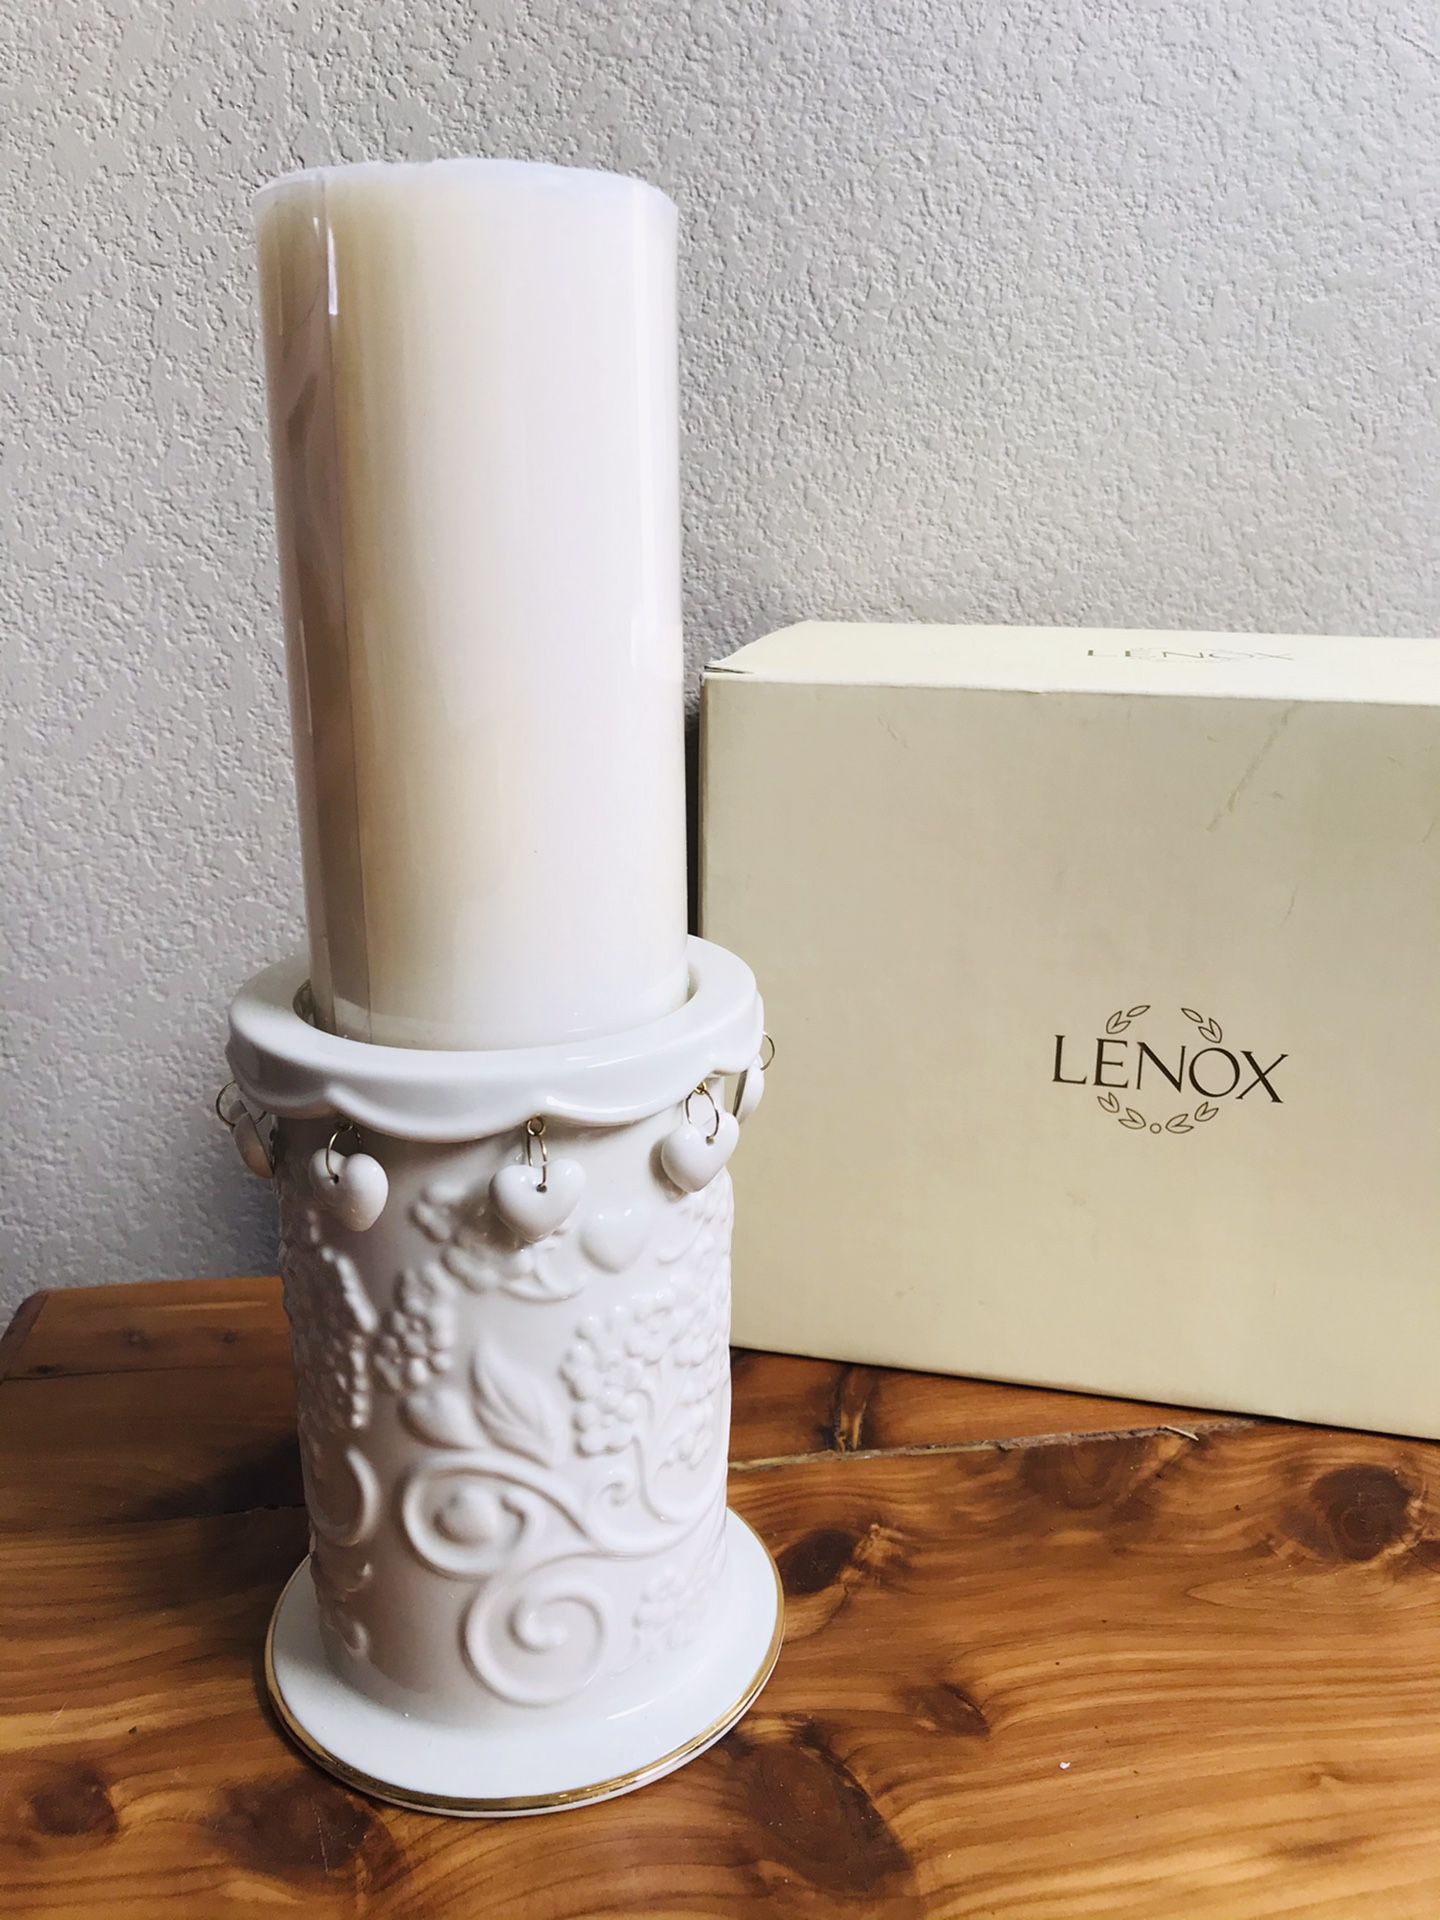 Lenox Floating Hearts Pillar Candleholder With Candle - New in Box